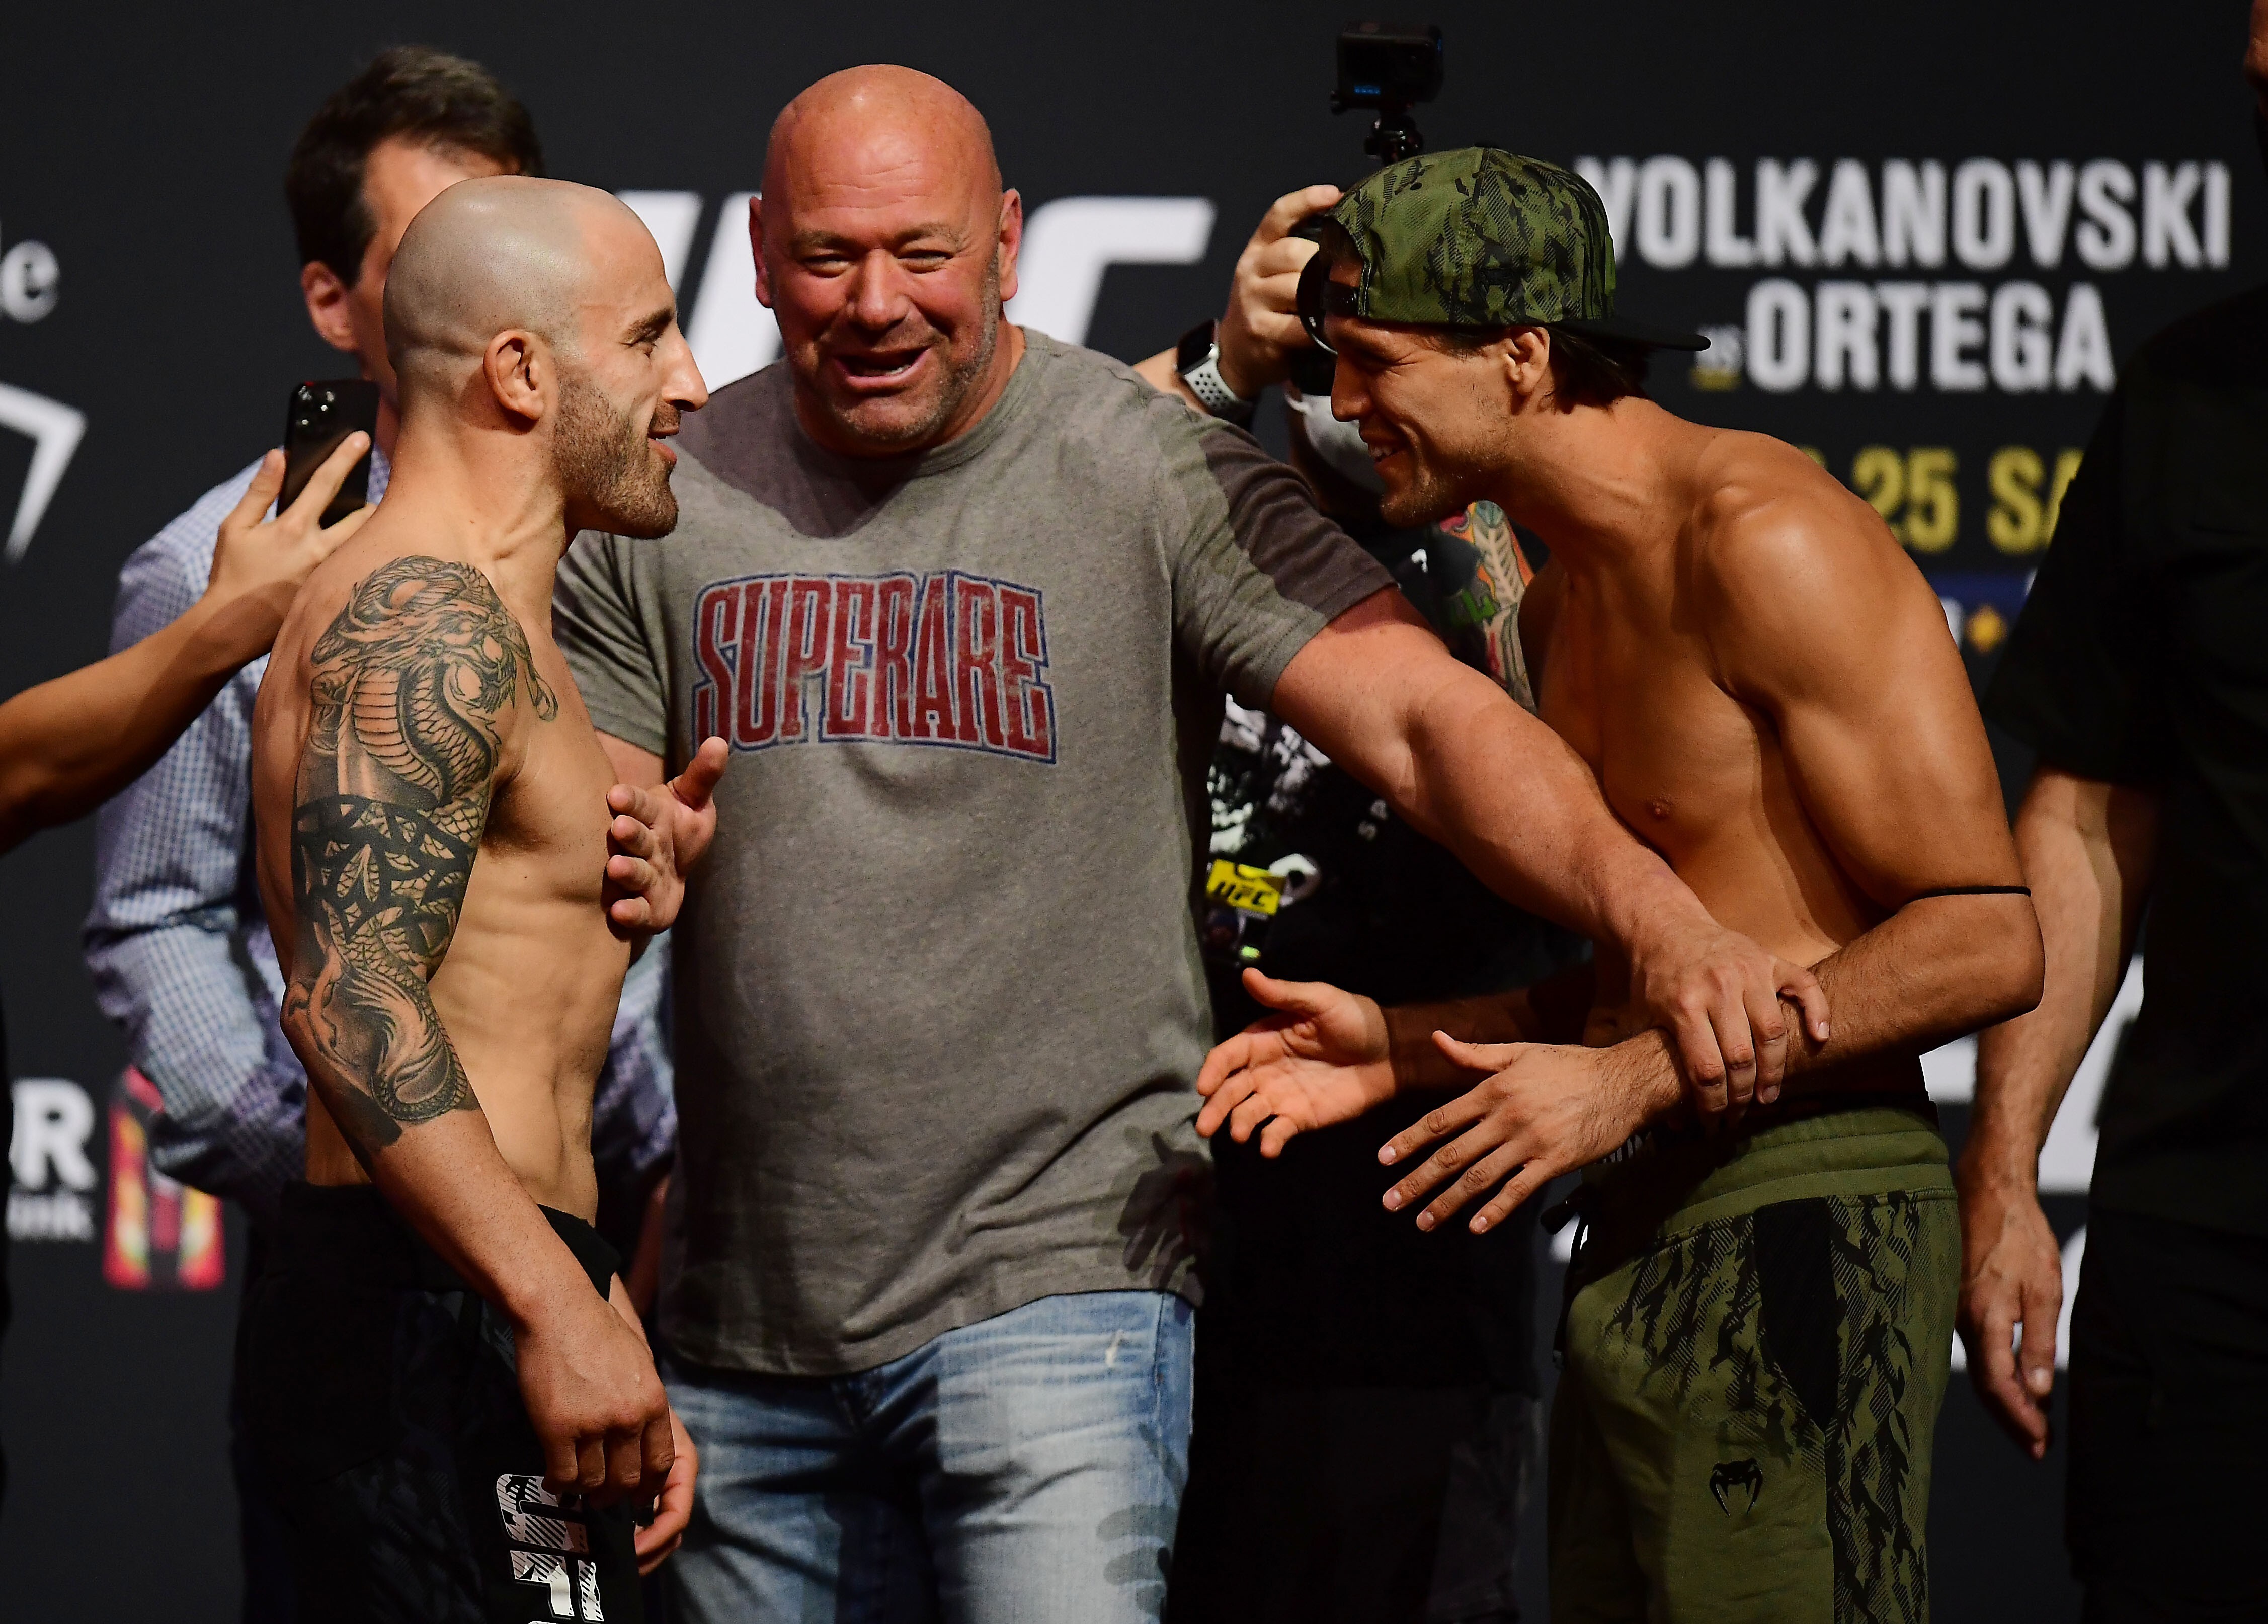 Alex Volkanovski and Brian Ortega meet face to face as UFC president Dana White separates them during weigh-ins for UFC 266. Photo: USA TODAY Sports